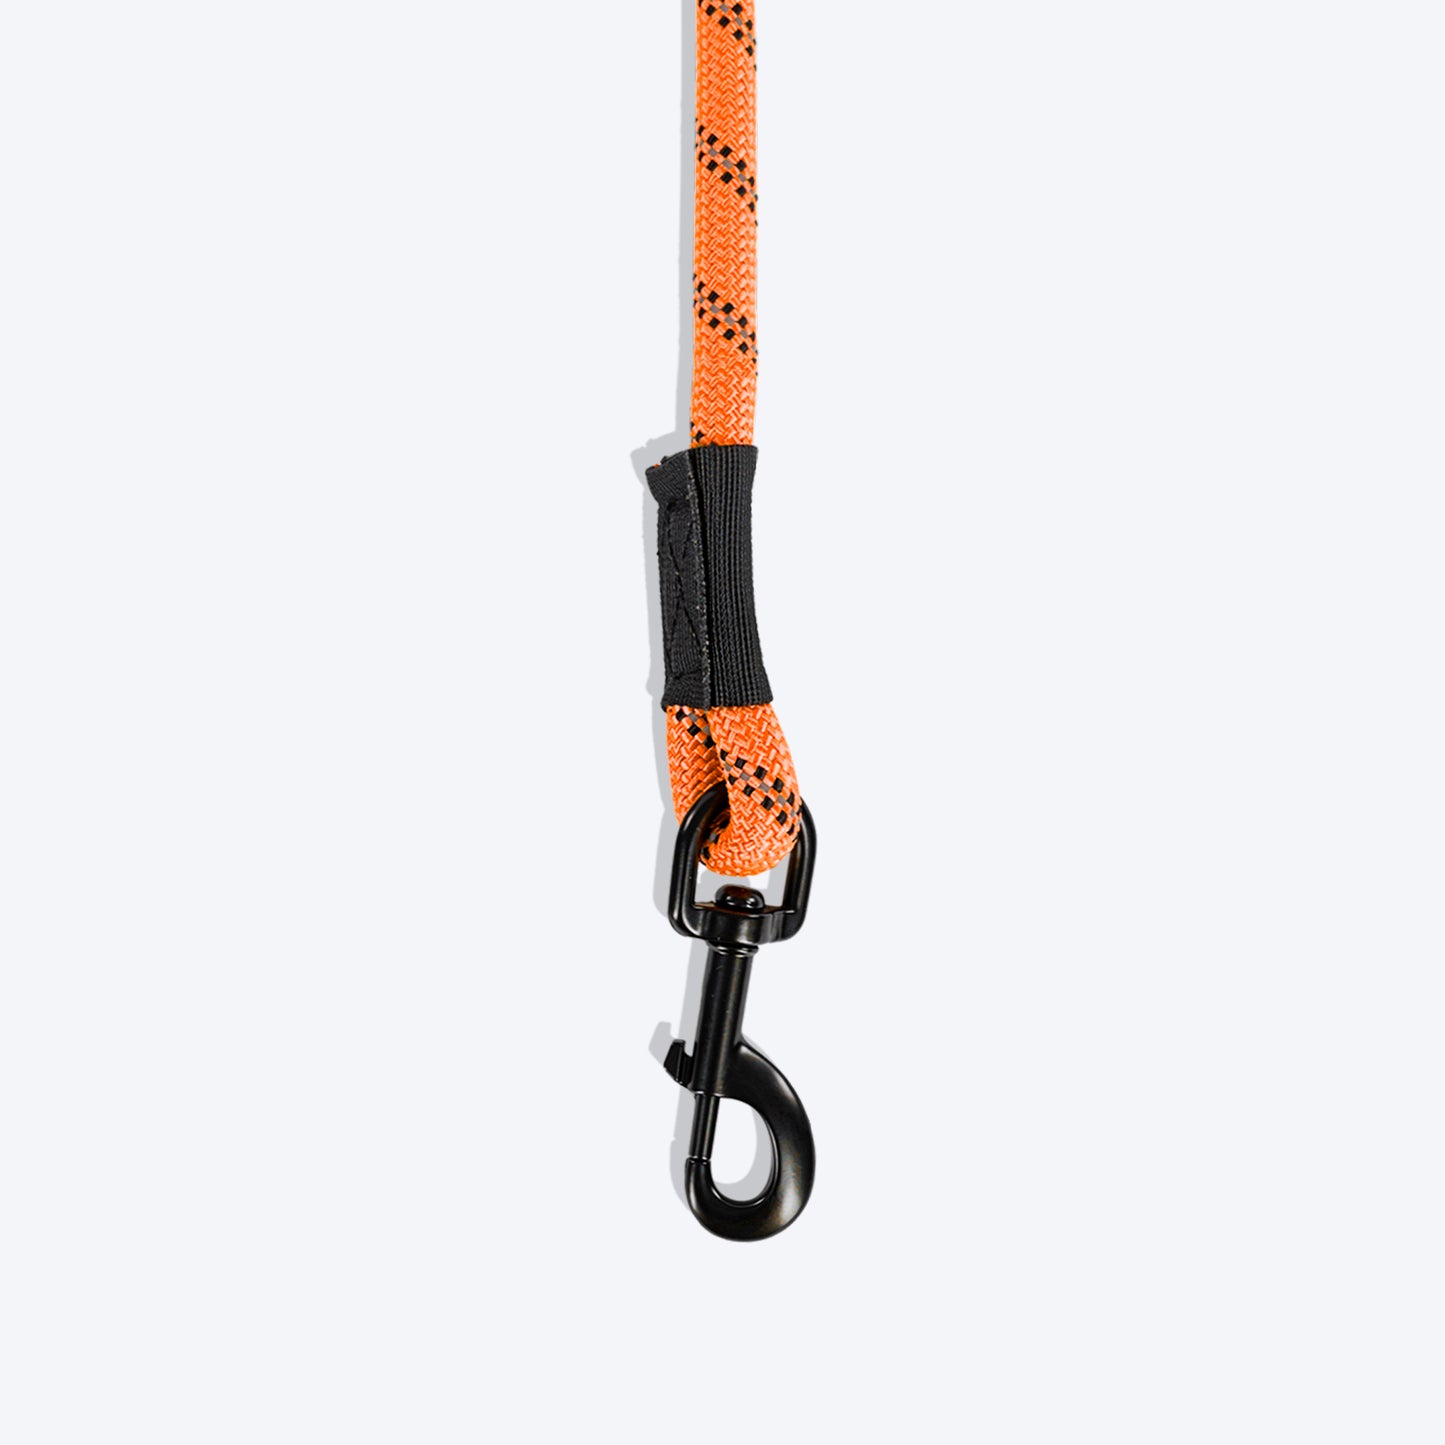 HUFT Rope Leash For Dog - Orange - 1.2 m - Heads Up For Tails